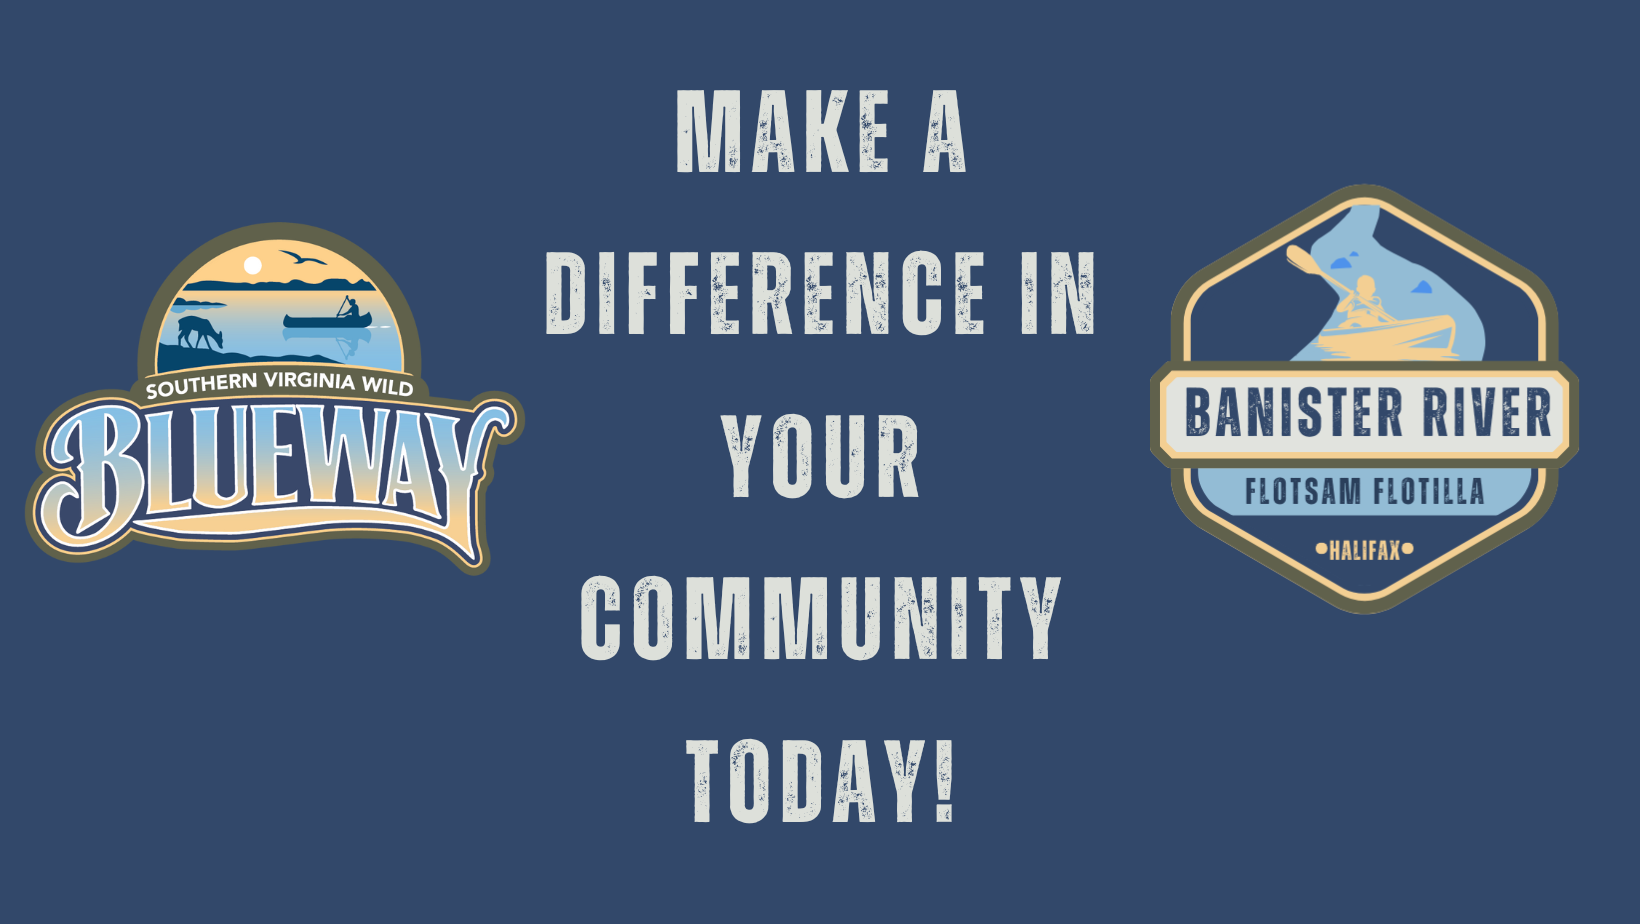 banner of the banister flotsam flotilla sign that says Make a difference in your community today! with the blueway logo